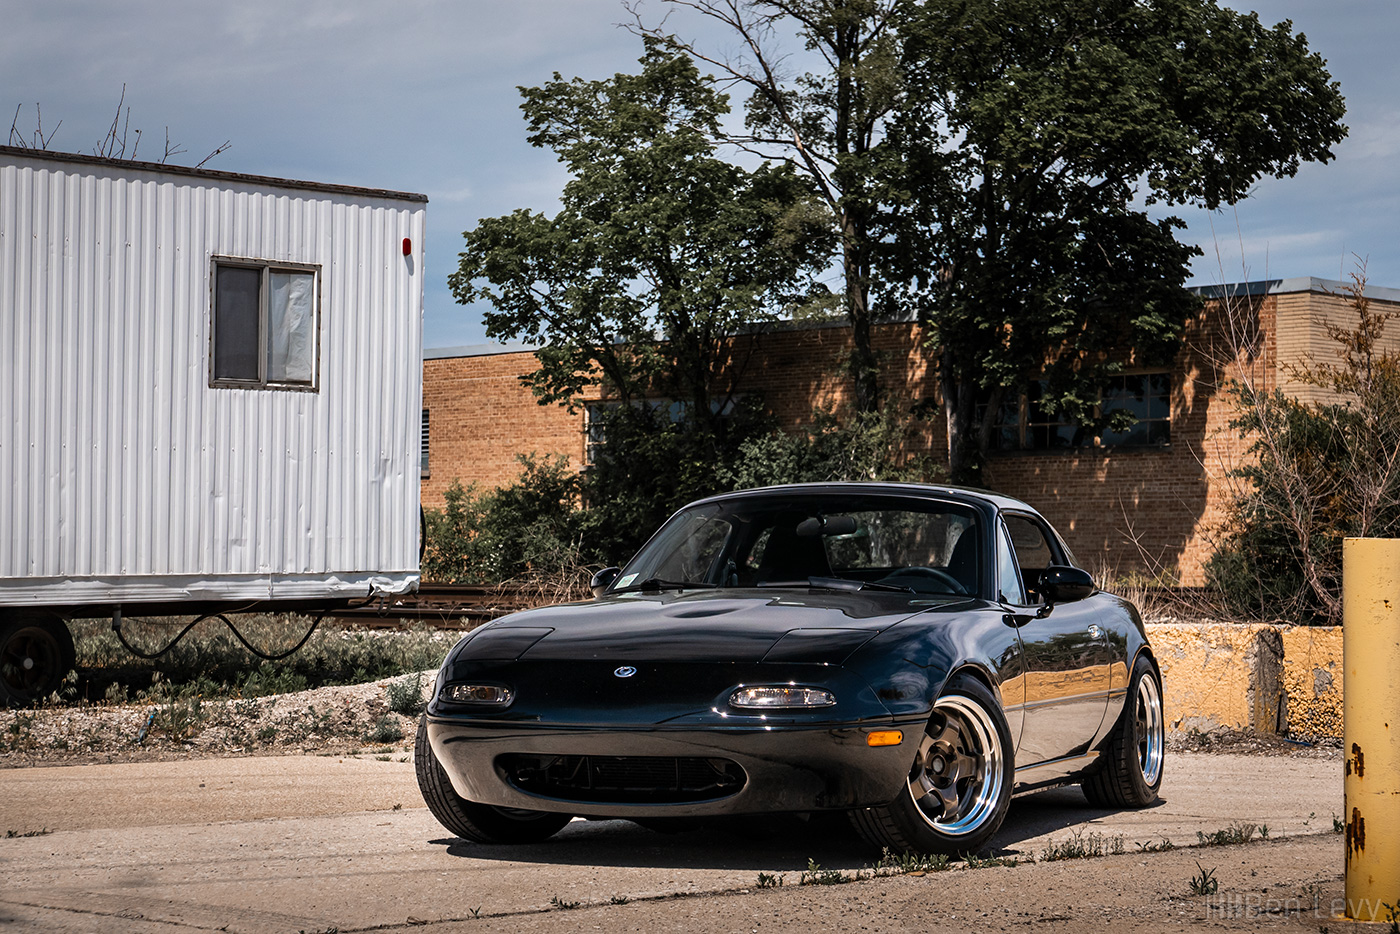 Showing off the Titanium Gold Work Meister S1 wheels on the Miata